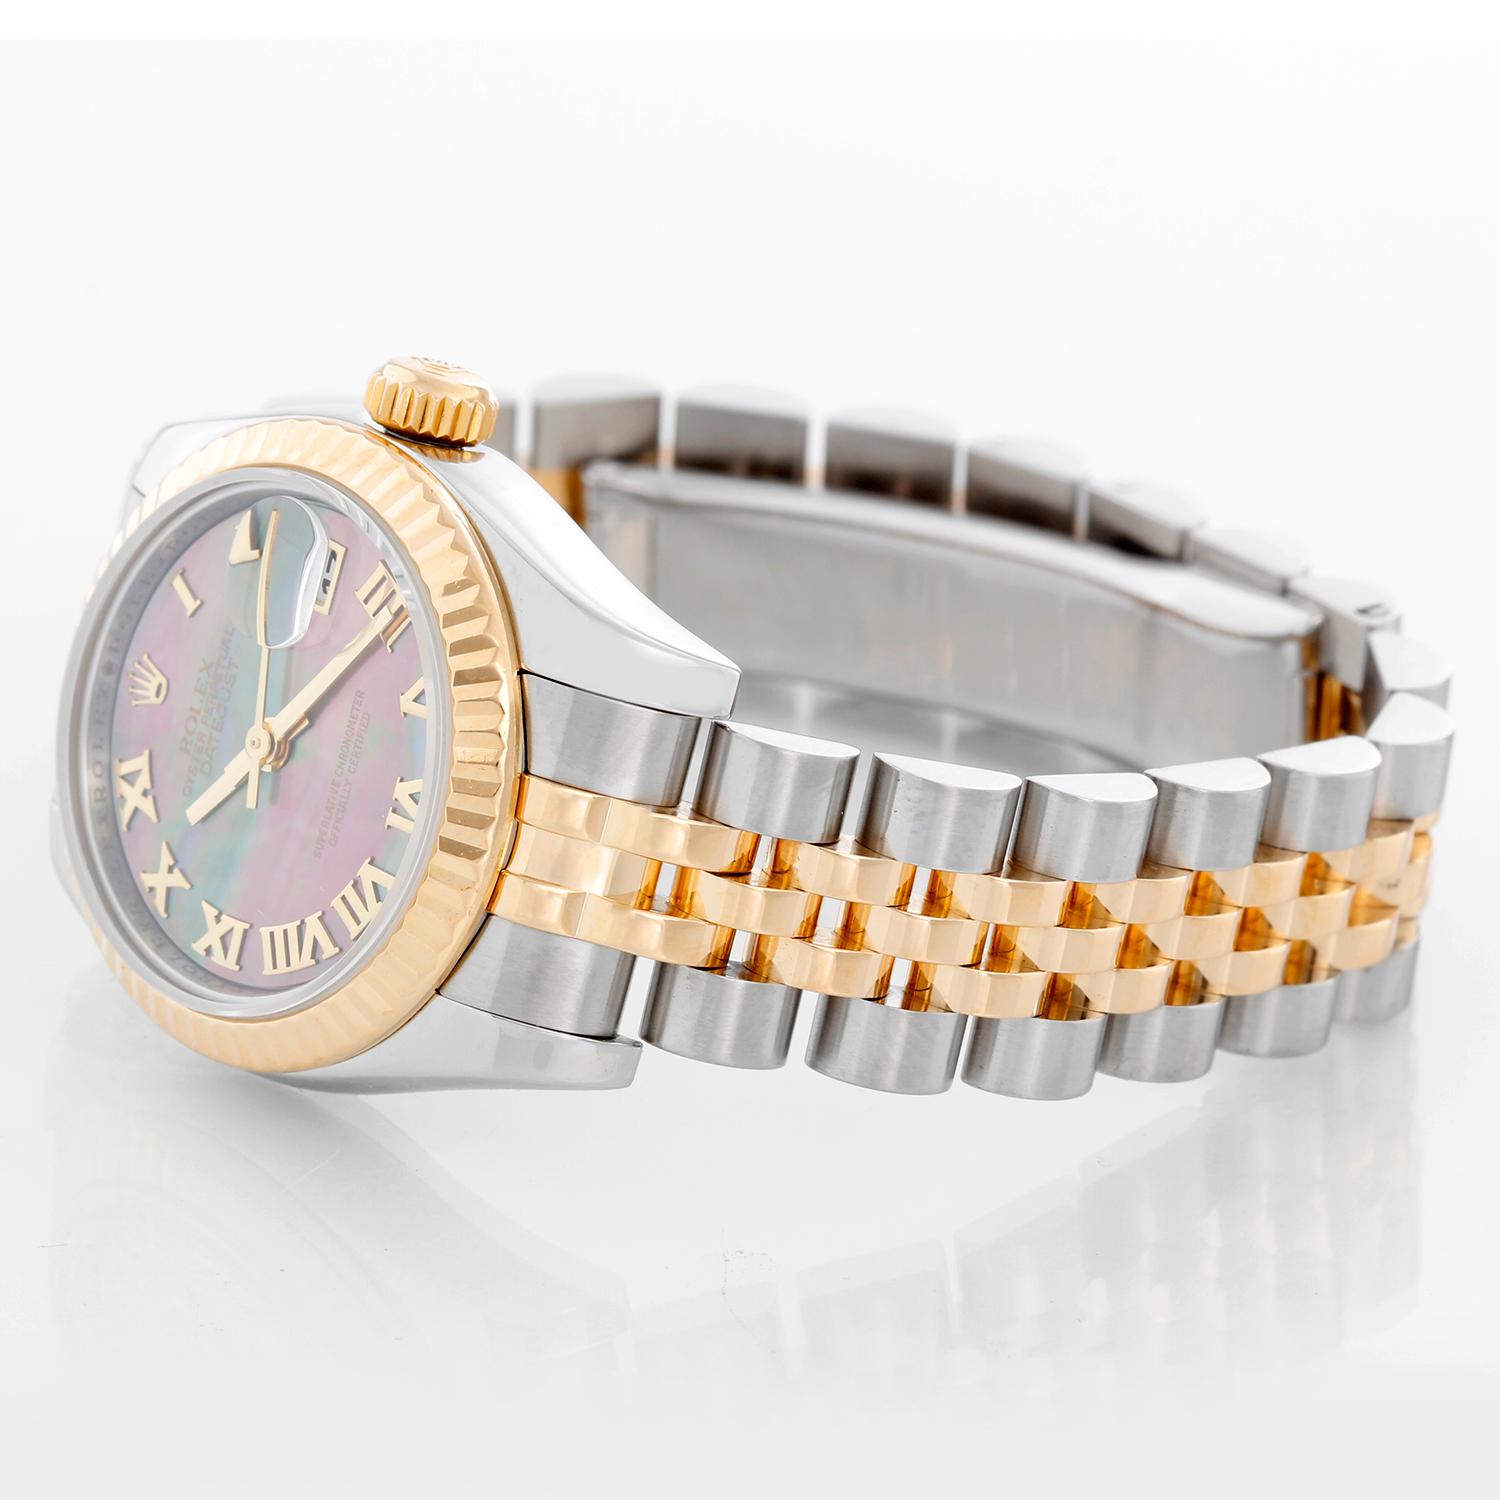 Rolex Ladies Datejust 2-Tone Watch 179173  - Automatic winding, Quickset, 31 jewels, sapphire crystal. Stainless steel case with 18k yellow gold fluted bezel ( 26 mm). Mother of Pearl dial with roman numerals. Stainless steel and 18k yellow gold